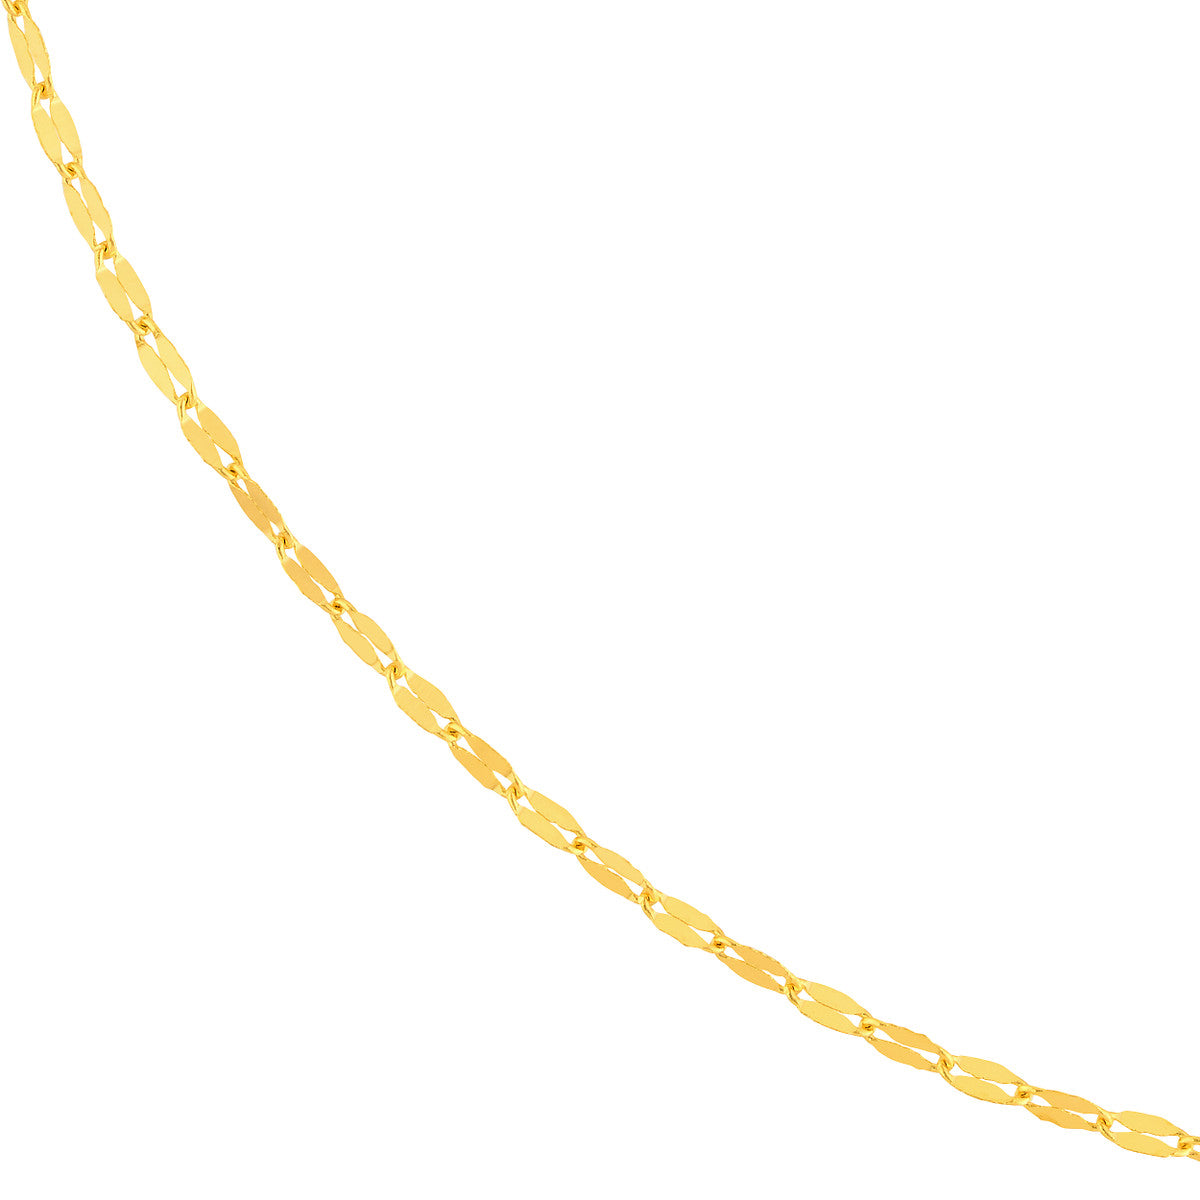 14K Yellow Gold 1.4mm Long Anchor Adjustable Anchor Chain Choker Necklace with Spring Ring, 15 Inches